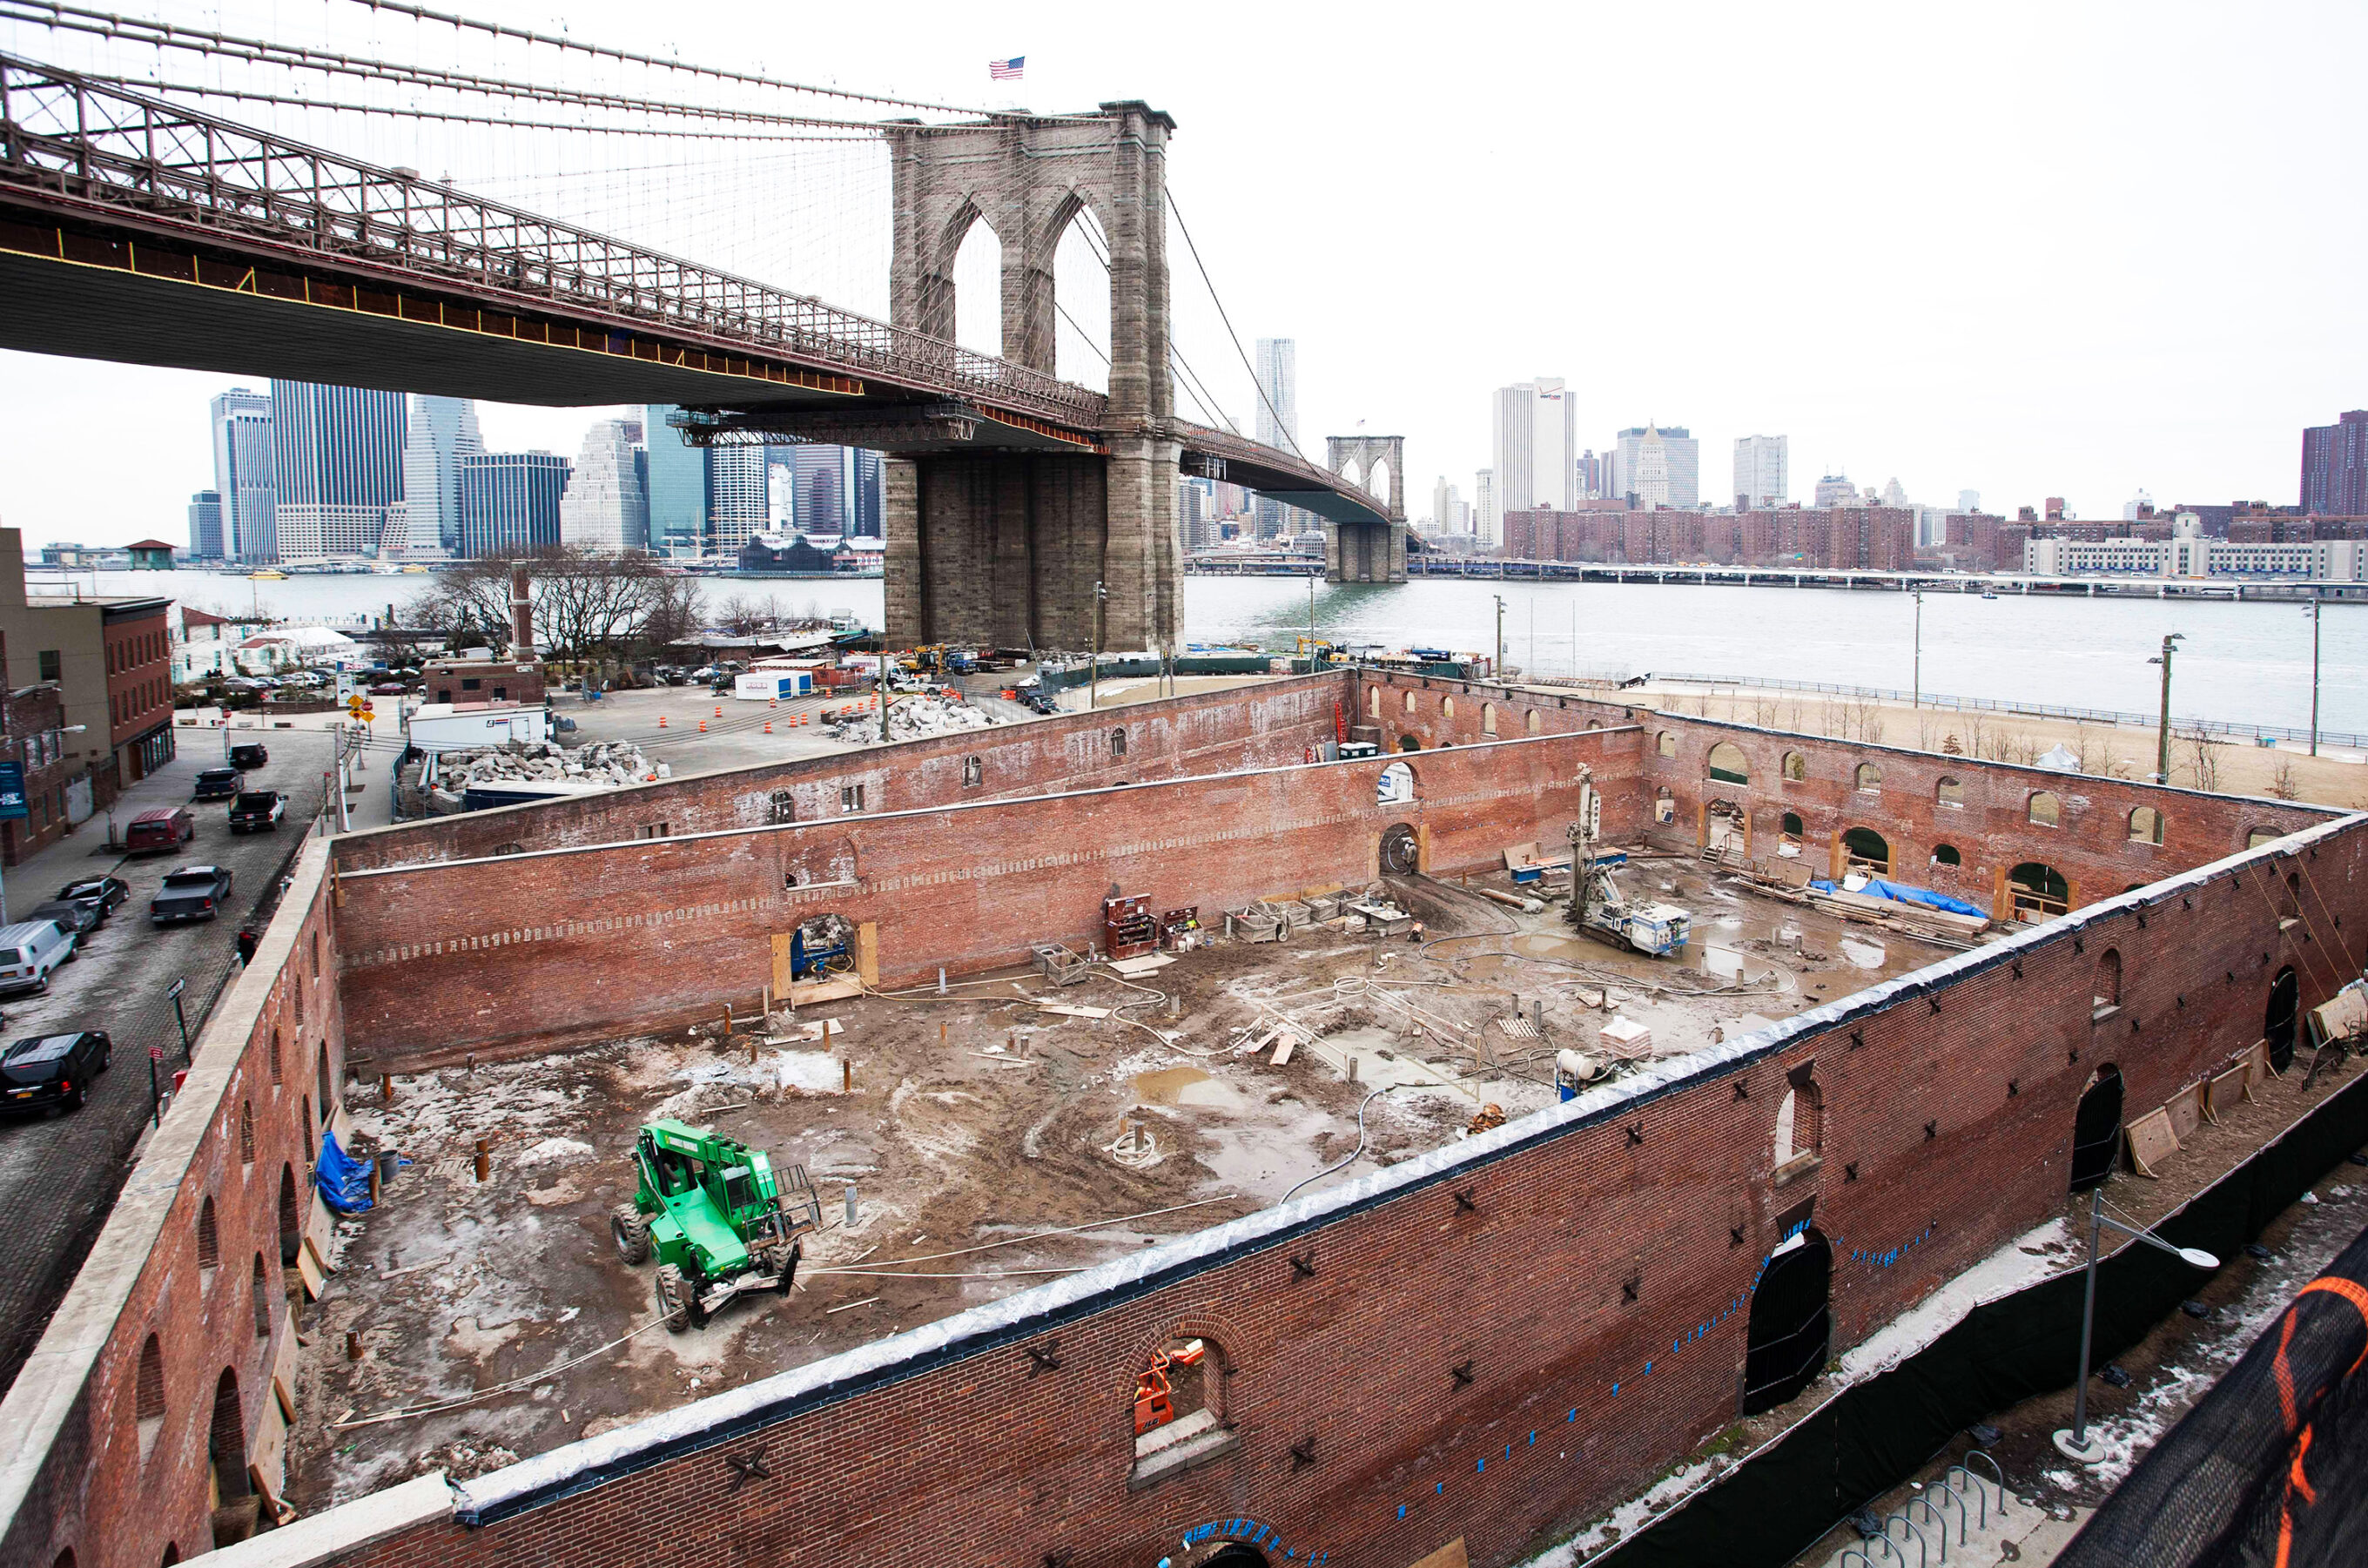 An aerial view looking over a construction site onto the east river and brooklyn bridge